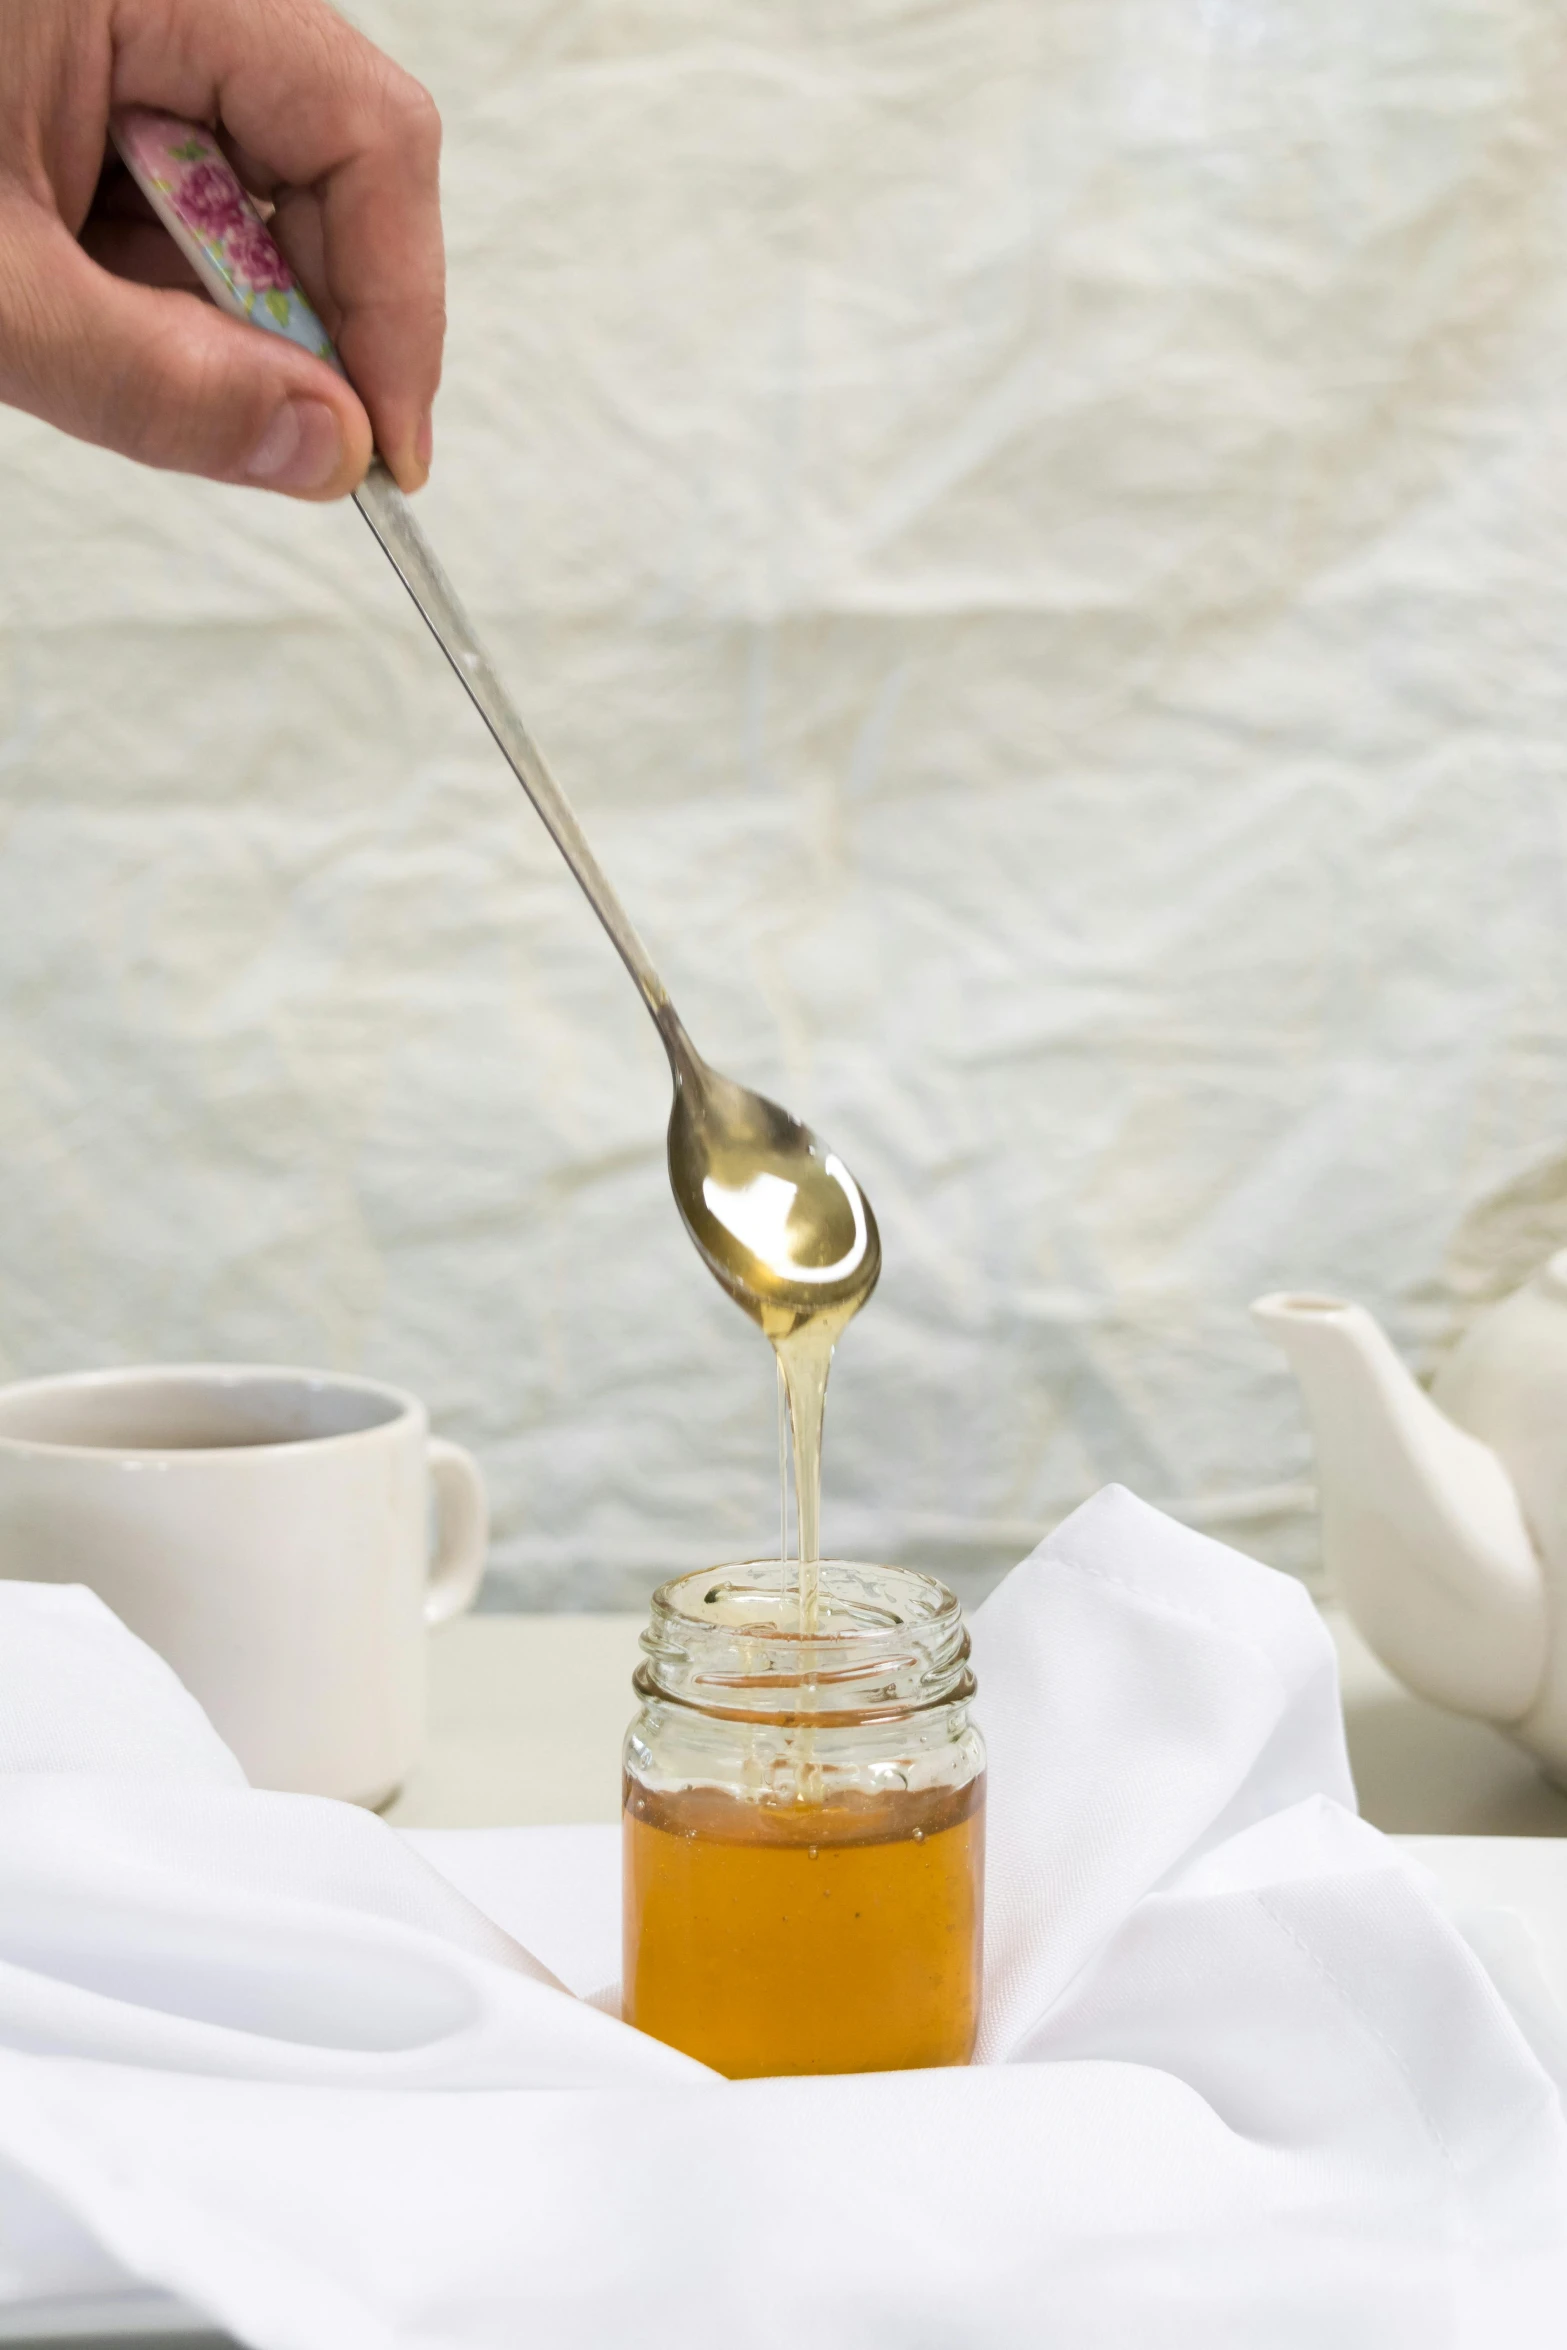 a spoon with some honey on it sitting in a jar